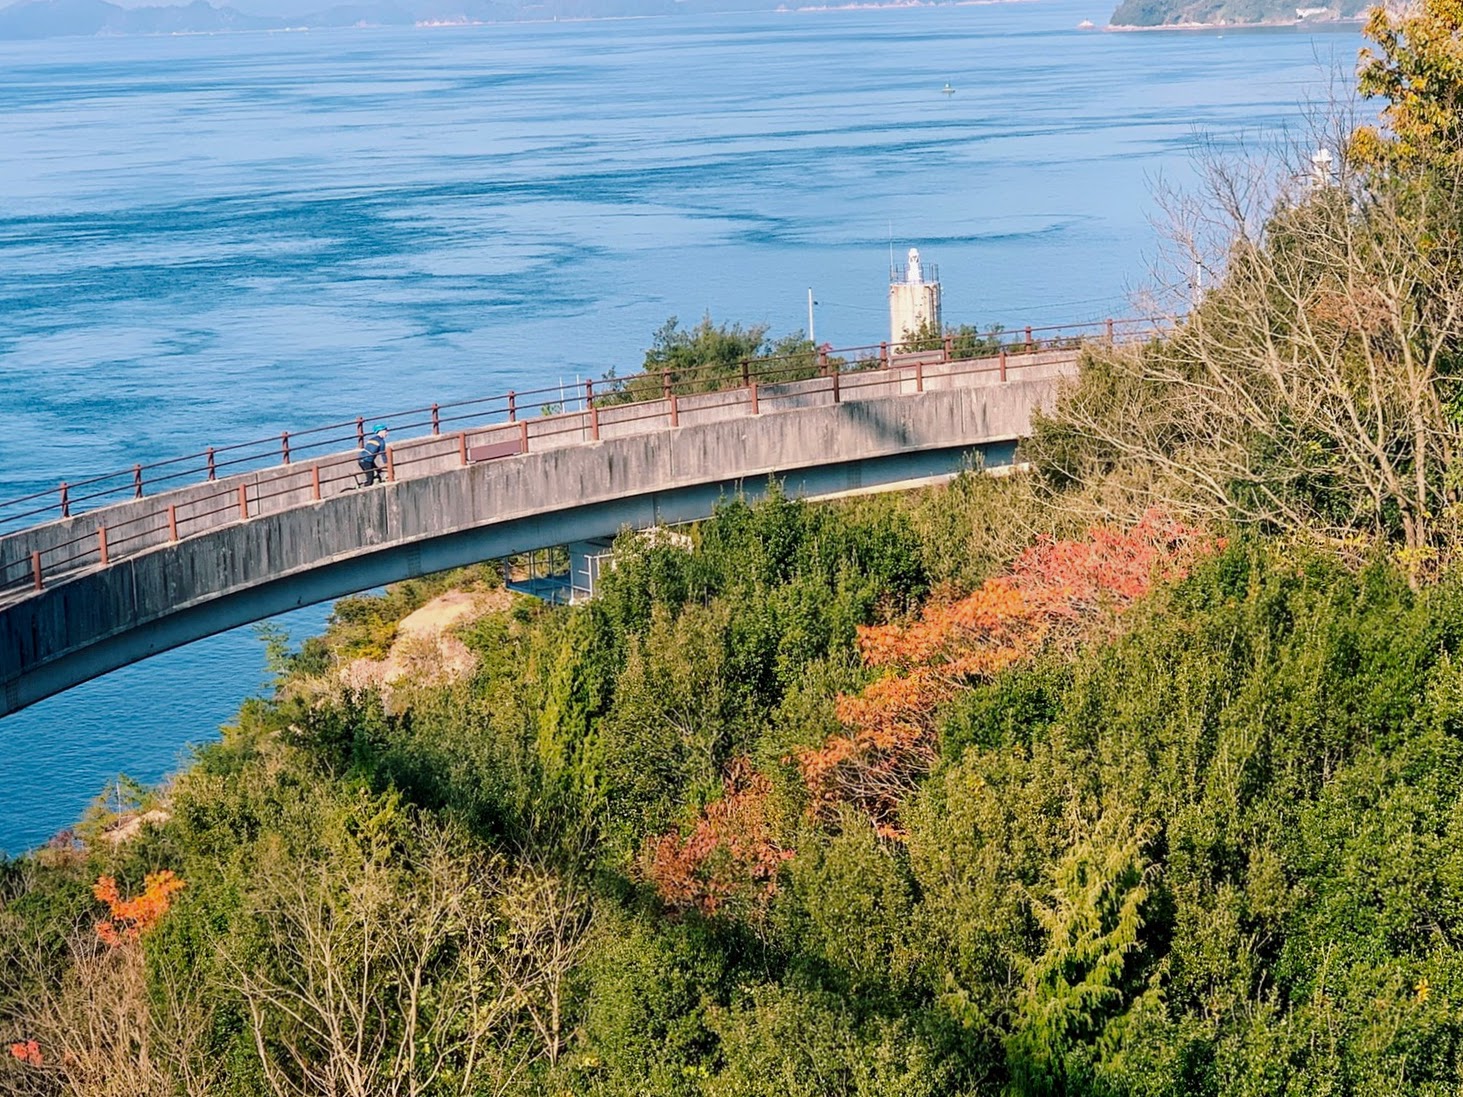 What is the best time of year to ride the Shimanami Kaido?